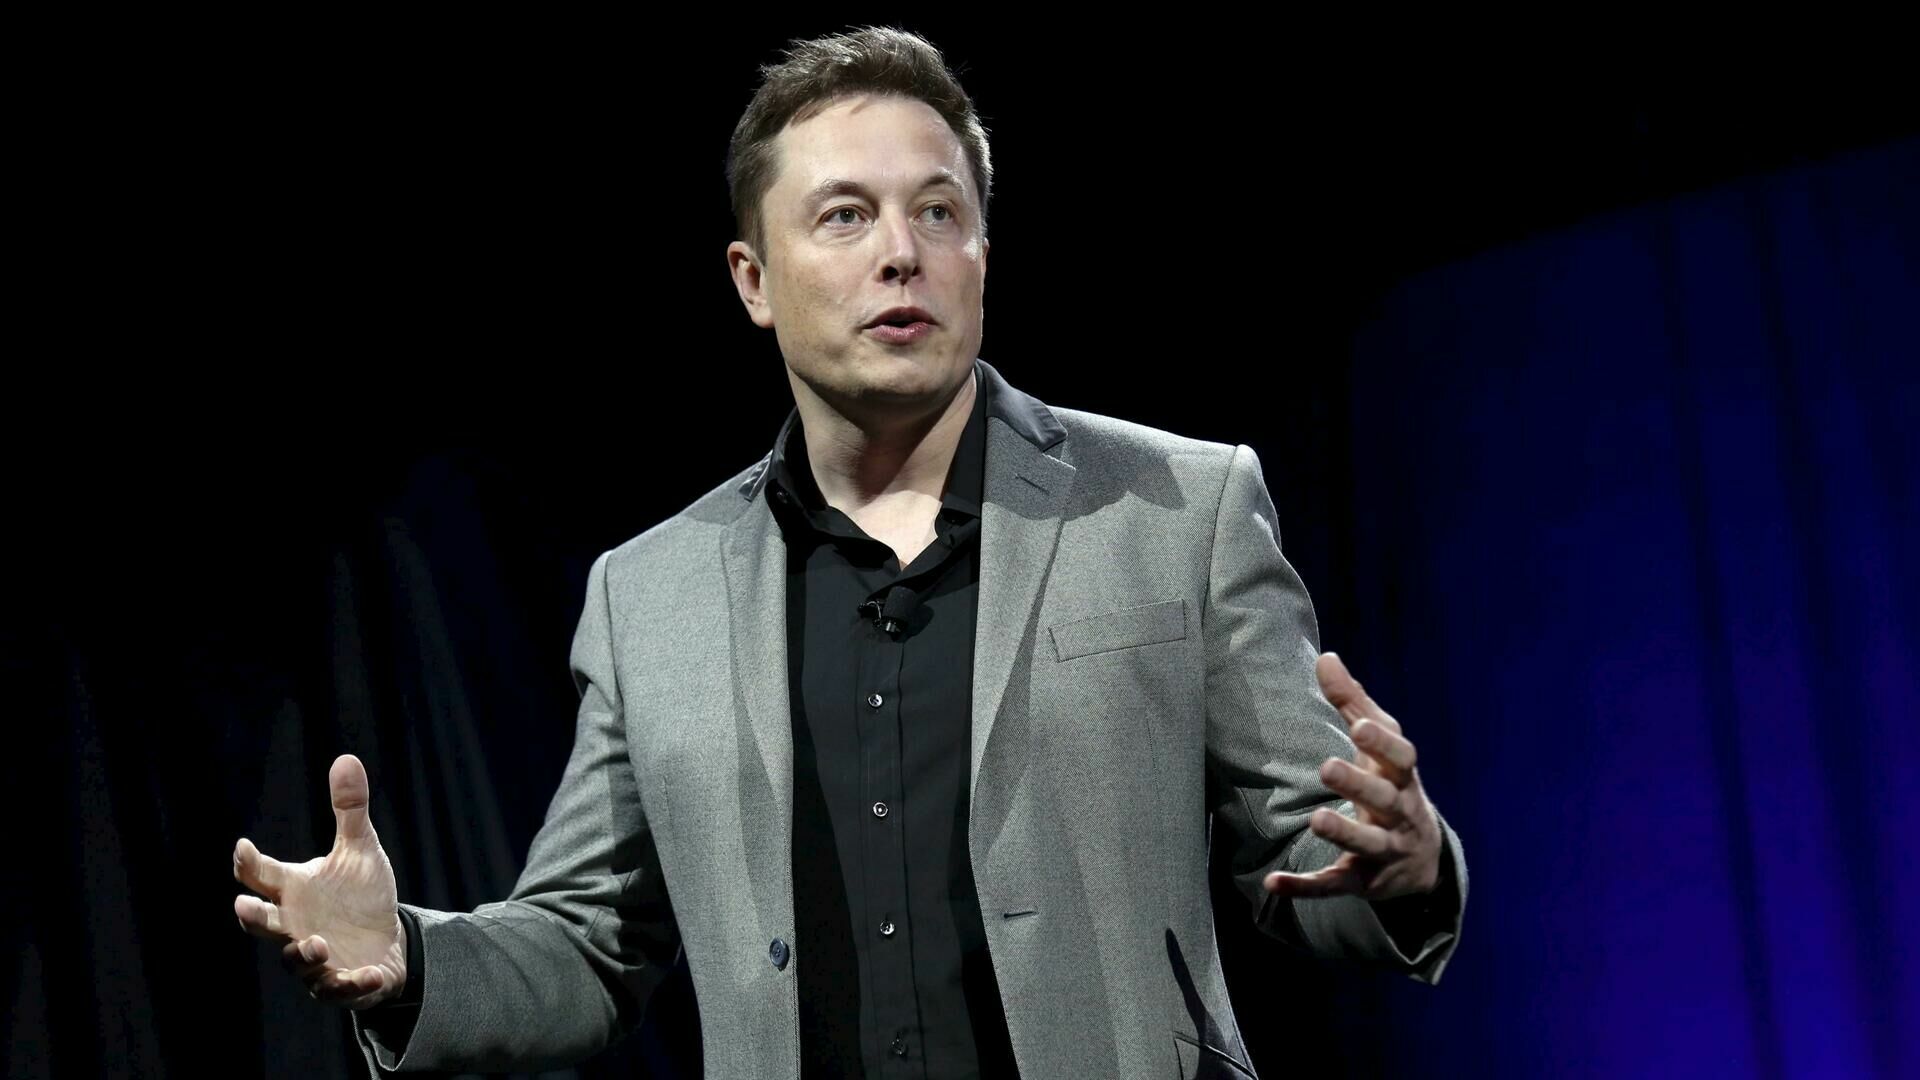 Elon Musk is going to create his own city in Texas